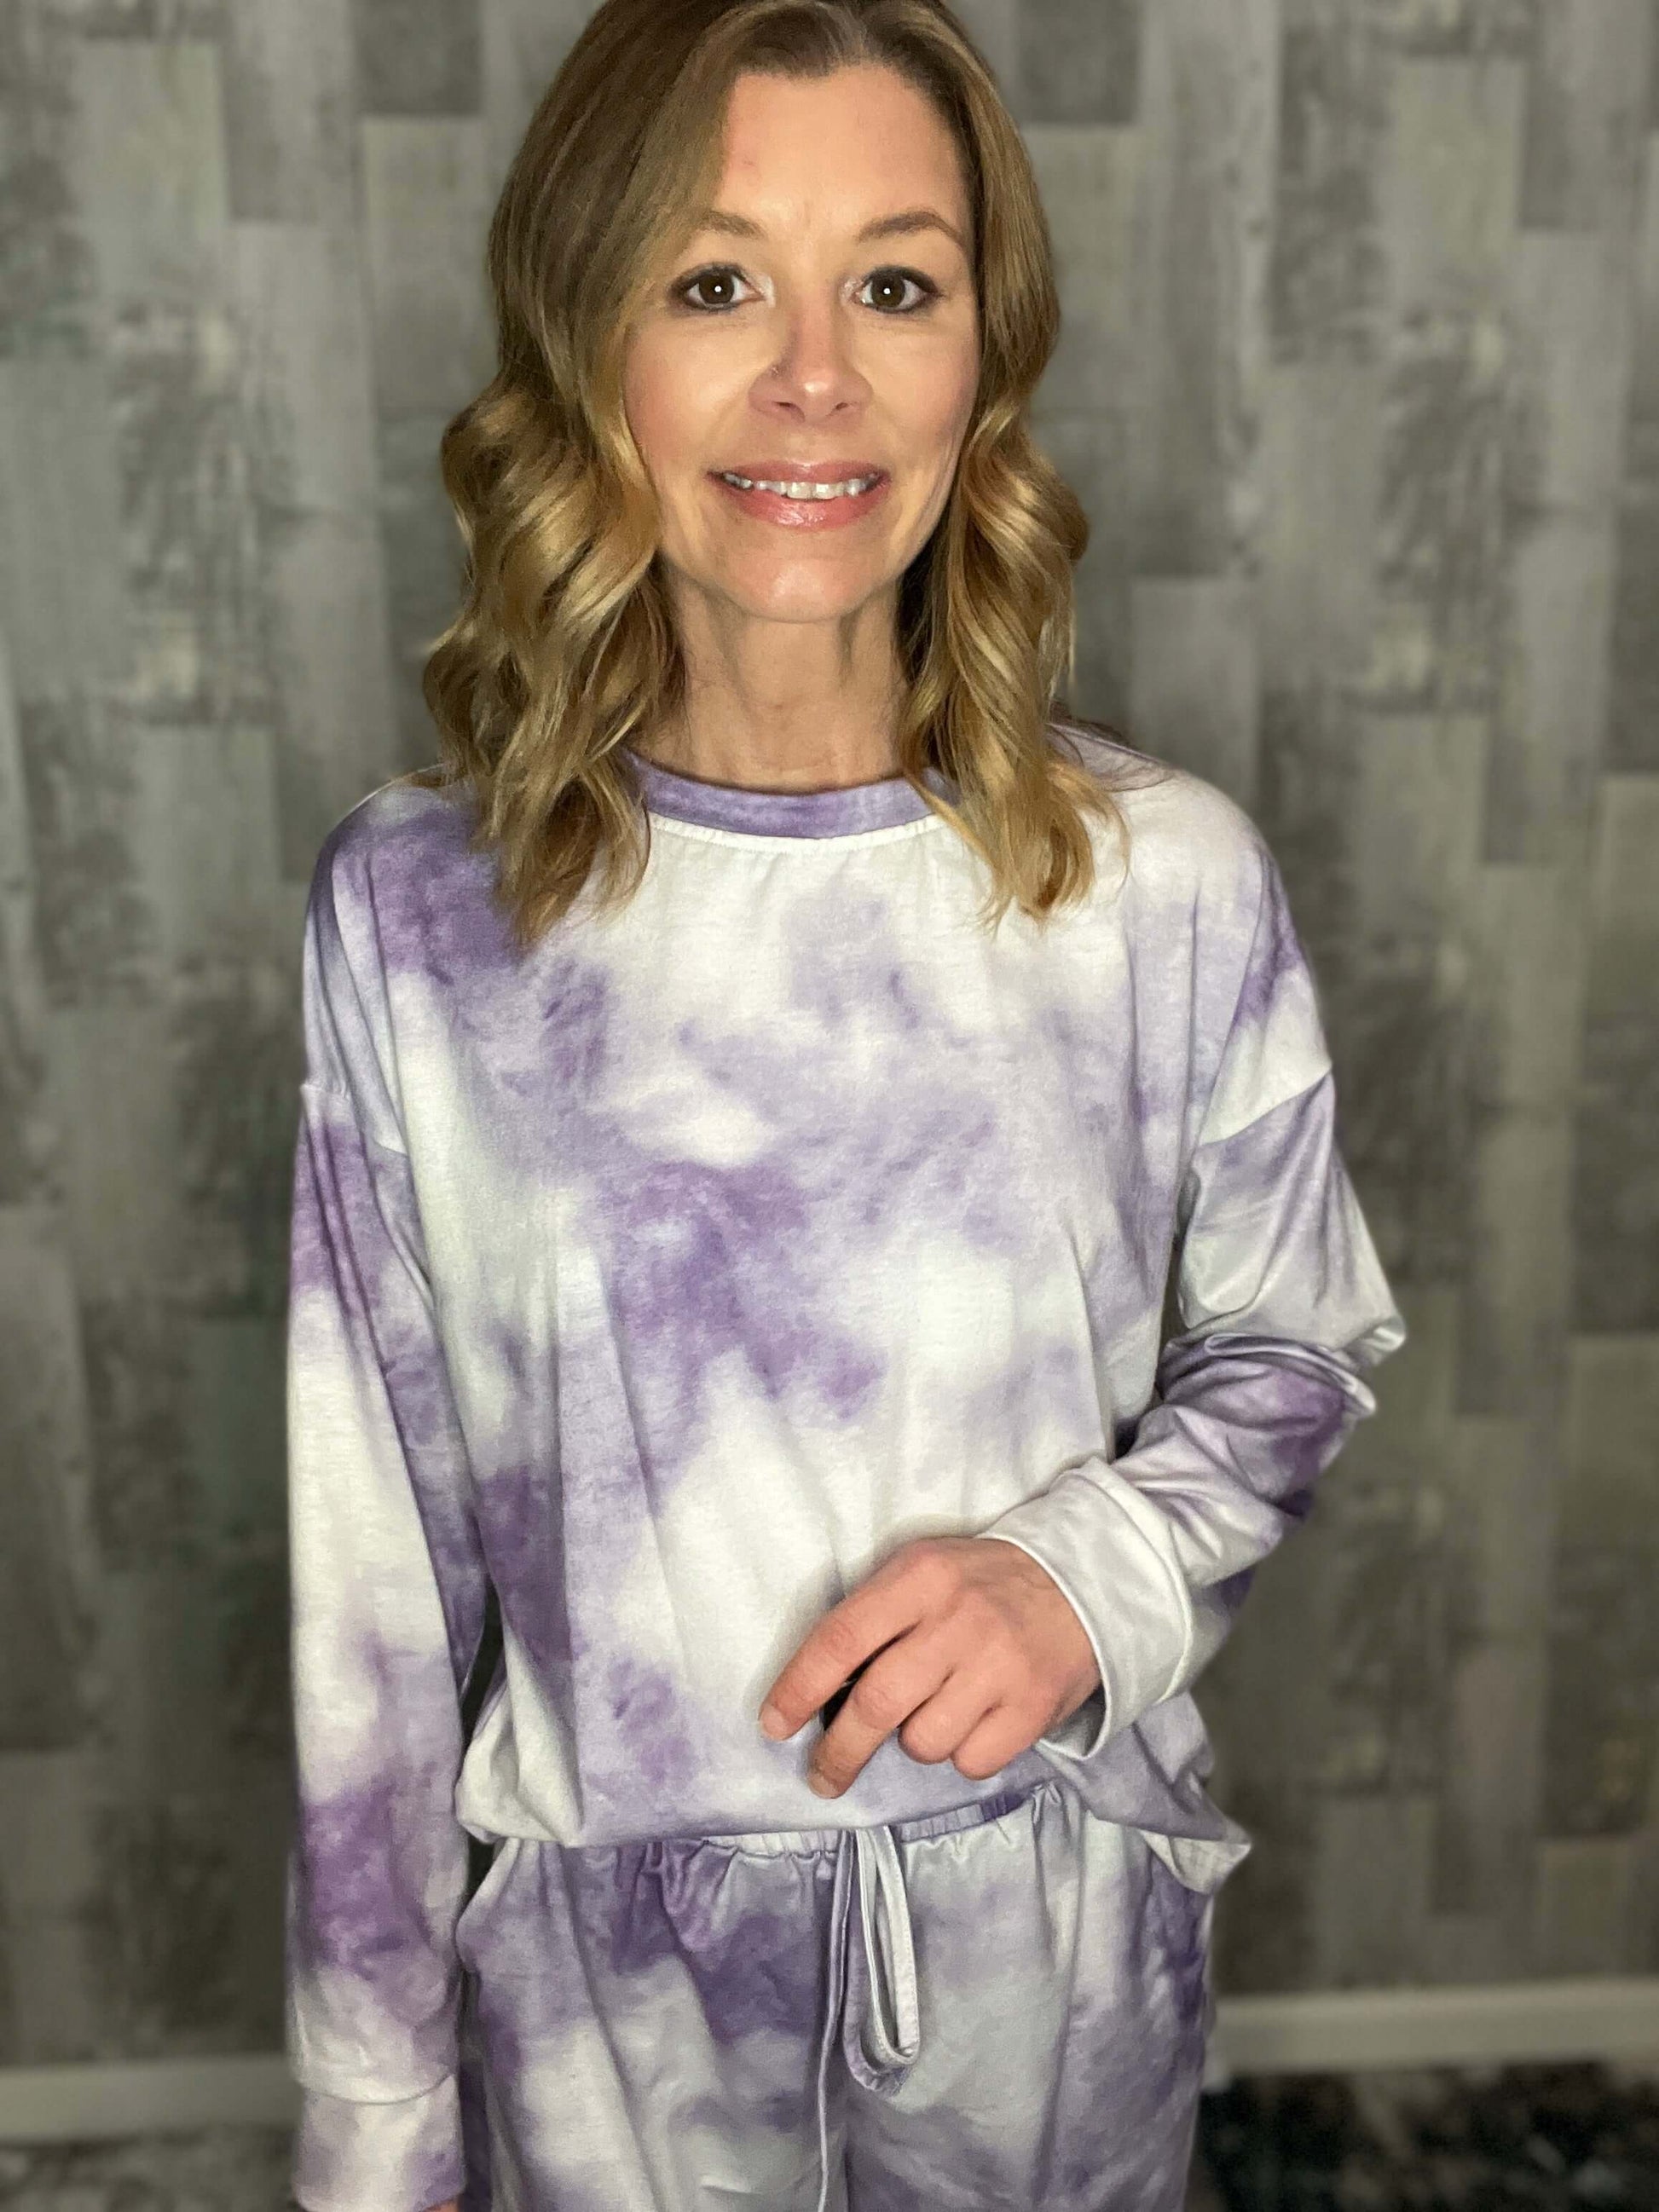 Loungewear 95% polyester 5% spandex, buttery soft fabric, buttery soft lounge set, clothing, long sleeve, long sleeve lounge set, long sleeves, lounge set, loungewear, purple tie dye, shorts lounge set, tie dye Size: Small, Medium, Large